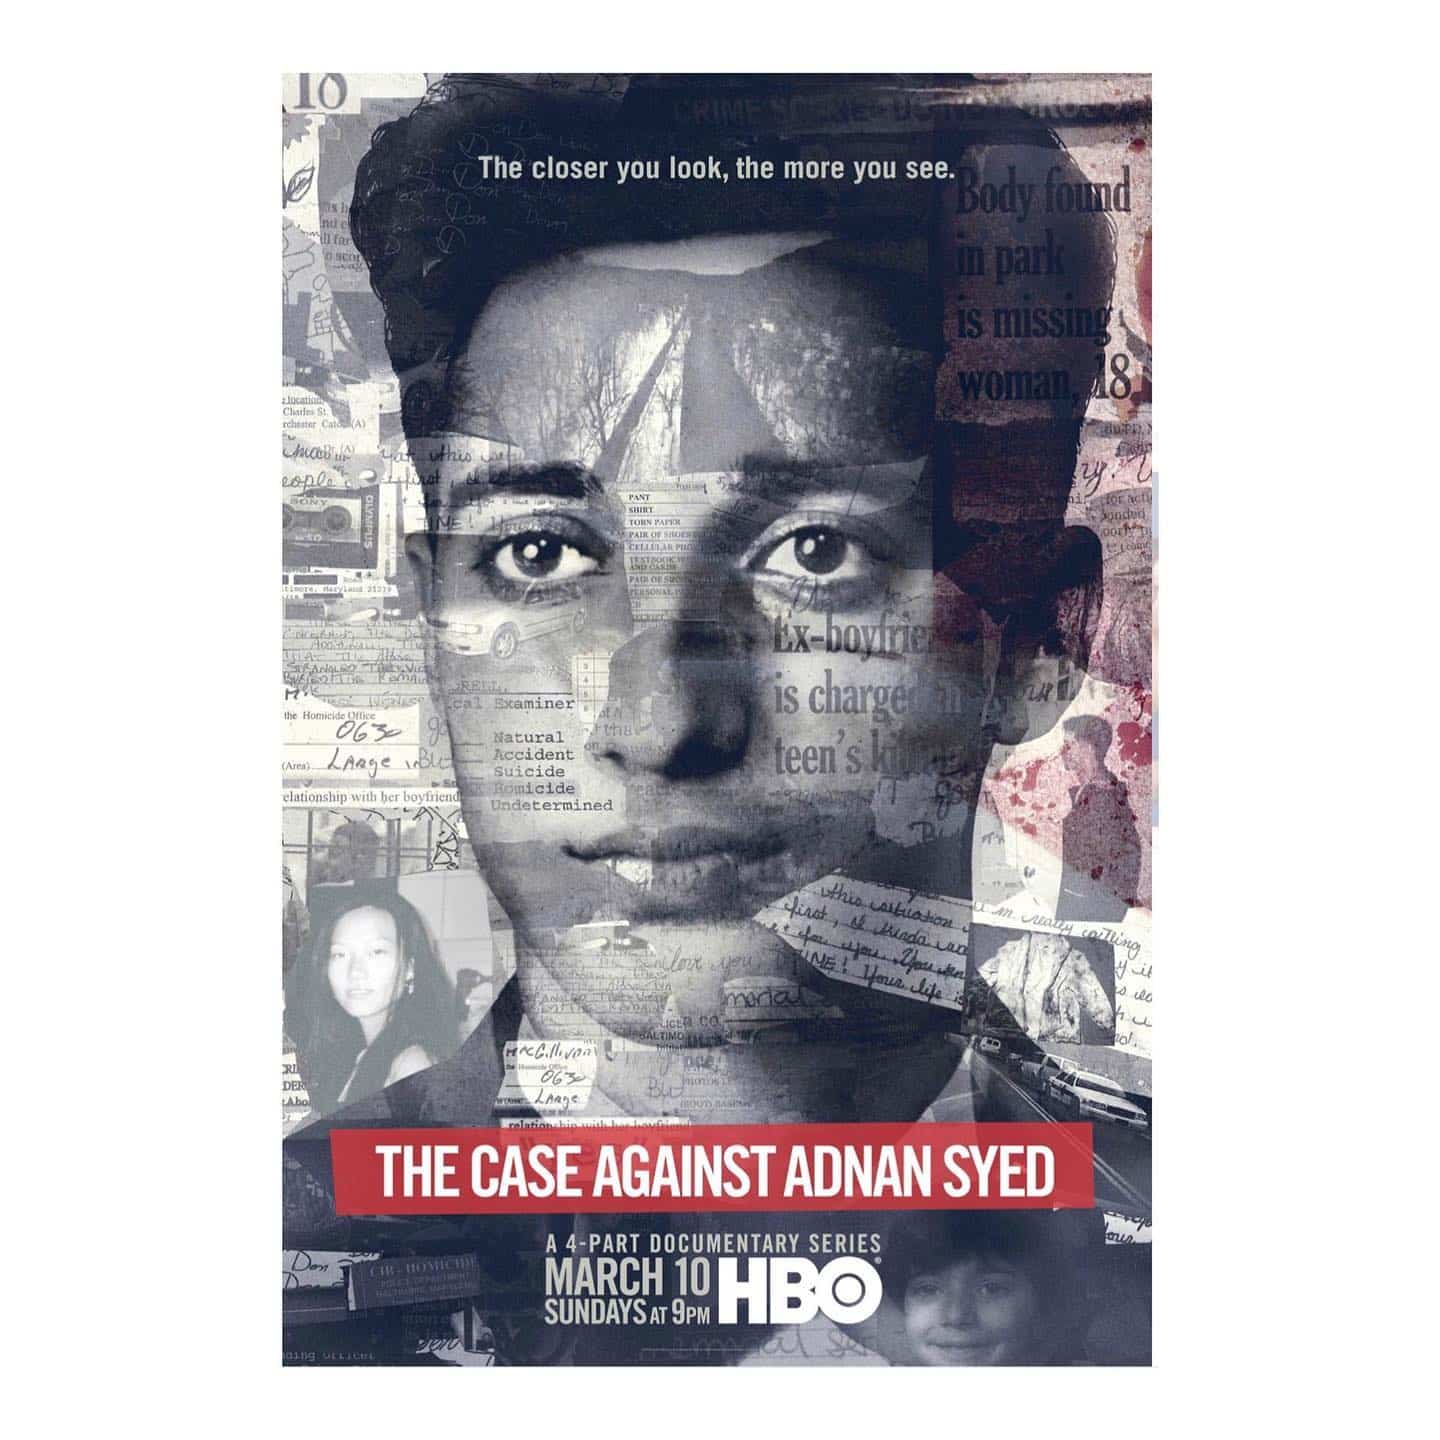 Congratulations @khanjemima and @instinctproductions on documentary series ‘The Case Against Adnan Syed’ receiving Emmy Award nomination for Outstanding Writing For A Nonfiction Programme 
.
.
.
.
.